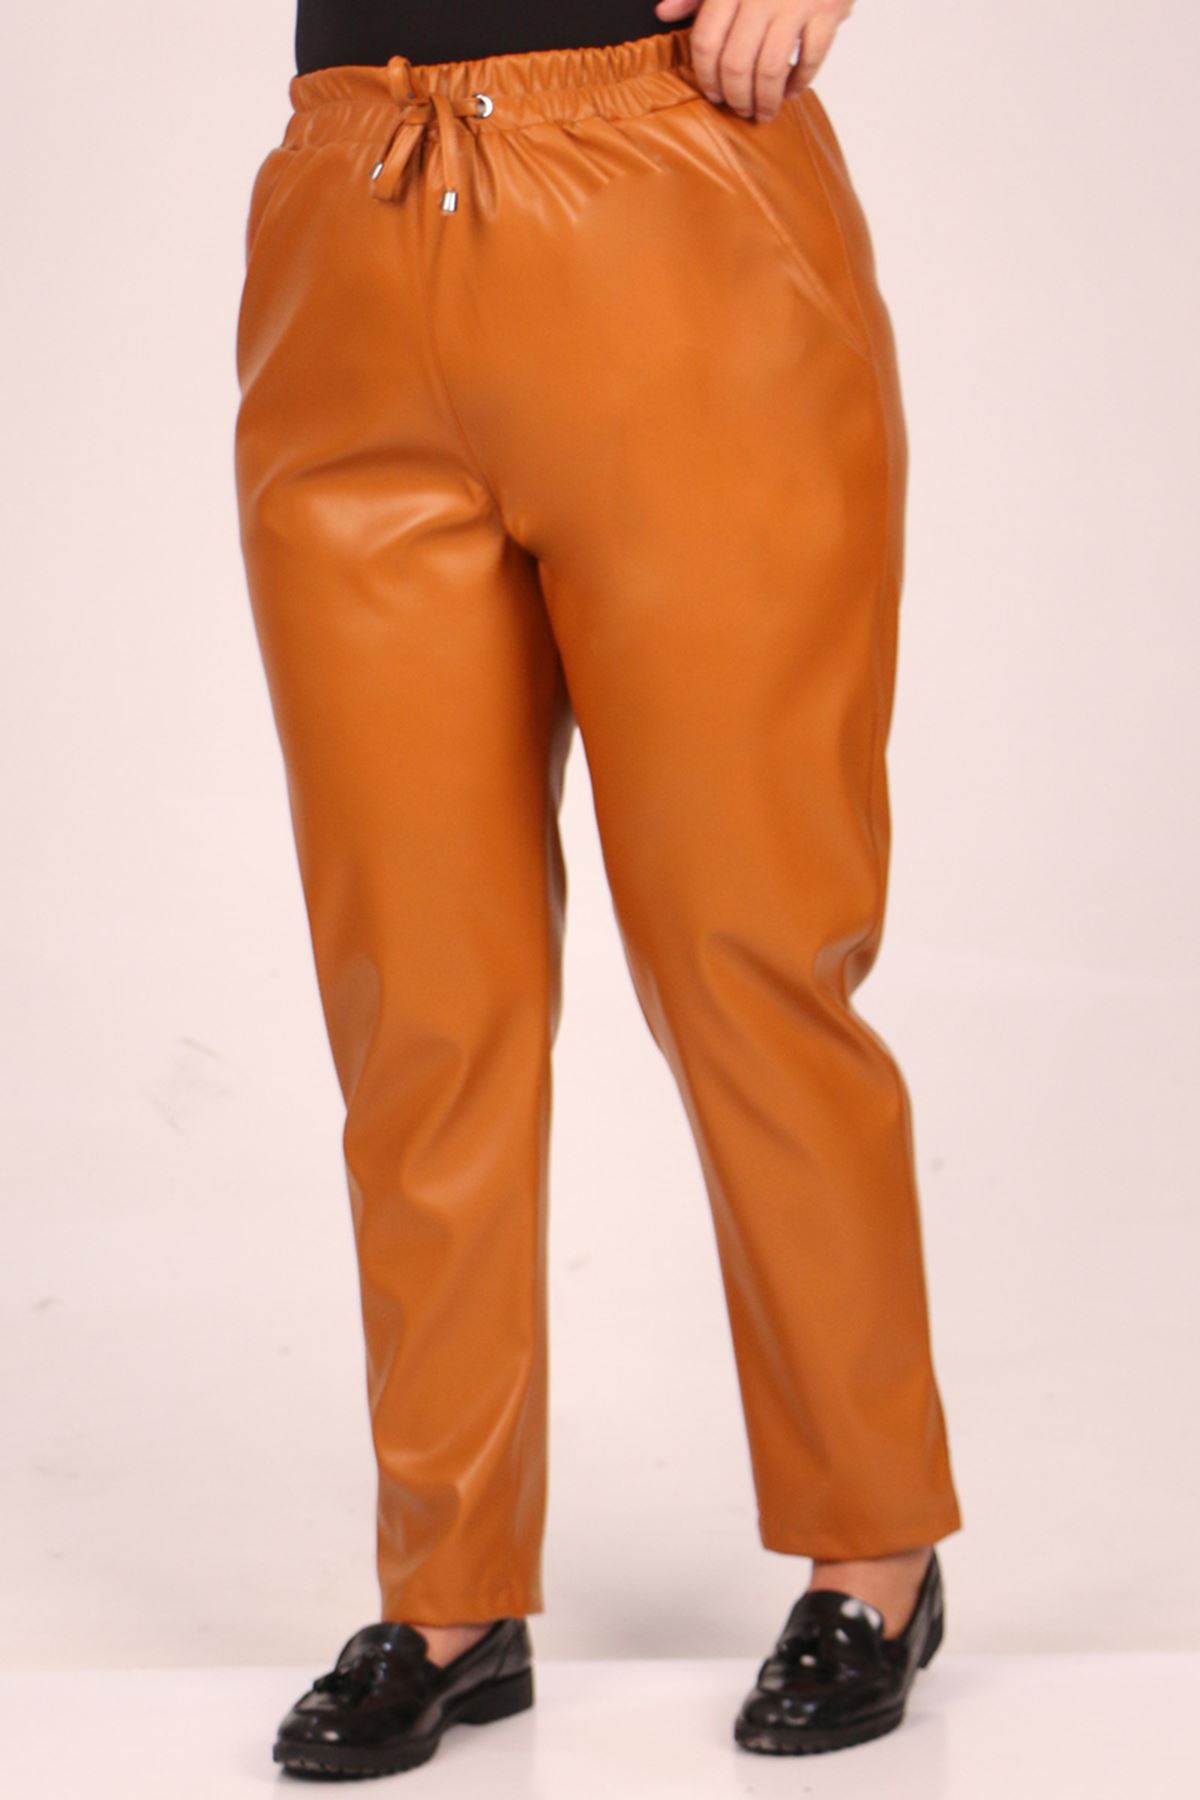 39039 Large Size Elastic Waist Leather Trousers-Tan